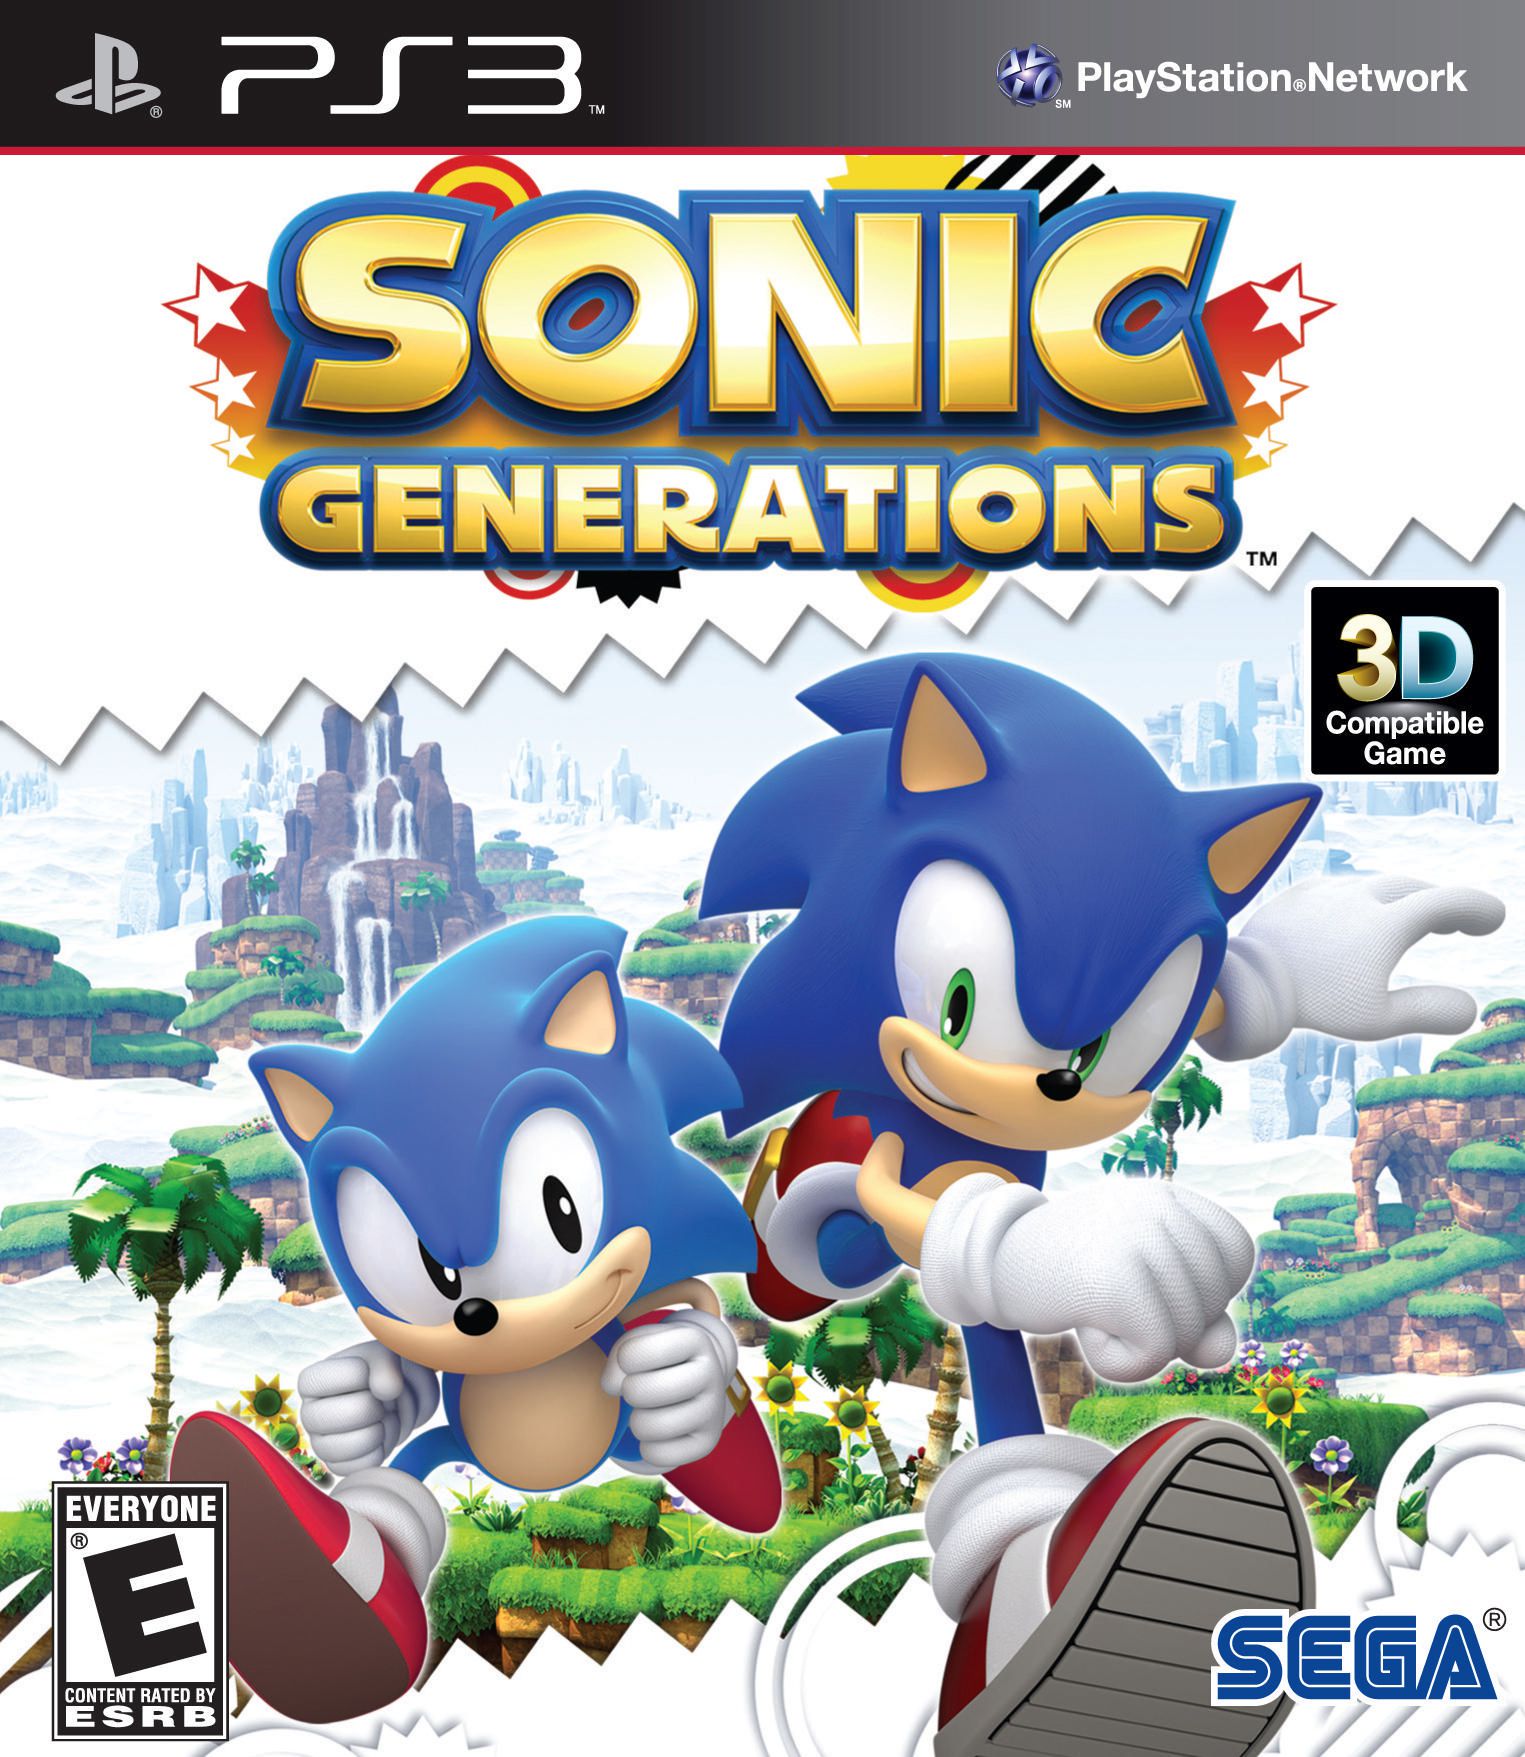 Sonic Classic Collection Images - LaunchBox Games Database